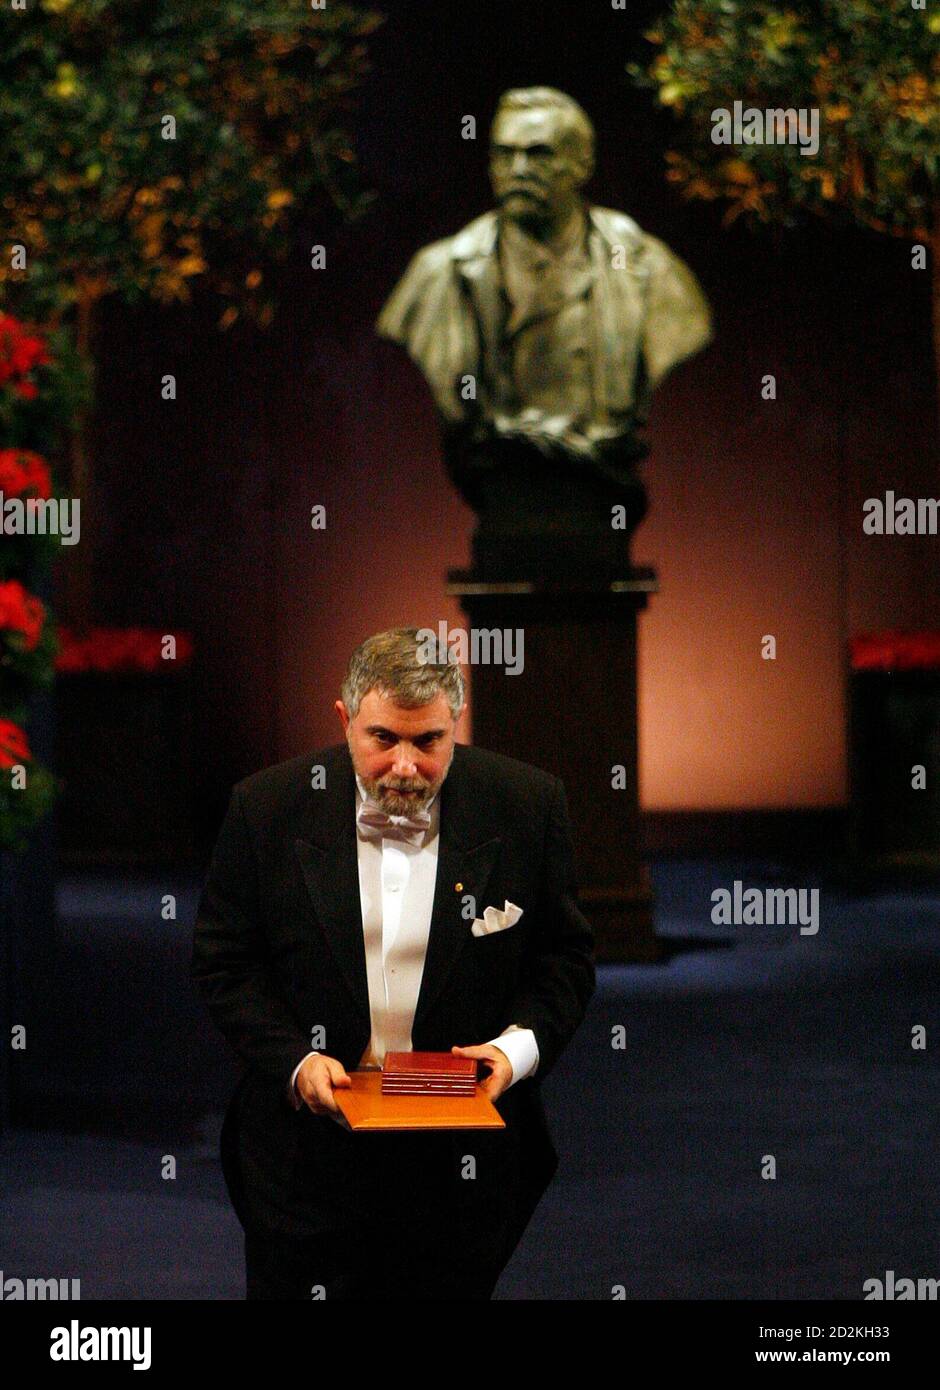 Paul Krugman of the U.S. reacts after receiving the 2008 Nobel Prize in  Economics from Sweden's King Carl XVI Gustaf (R) at the Concert Hall in  Stockholm December 10, 2008. Krugman was